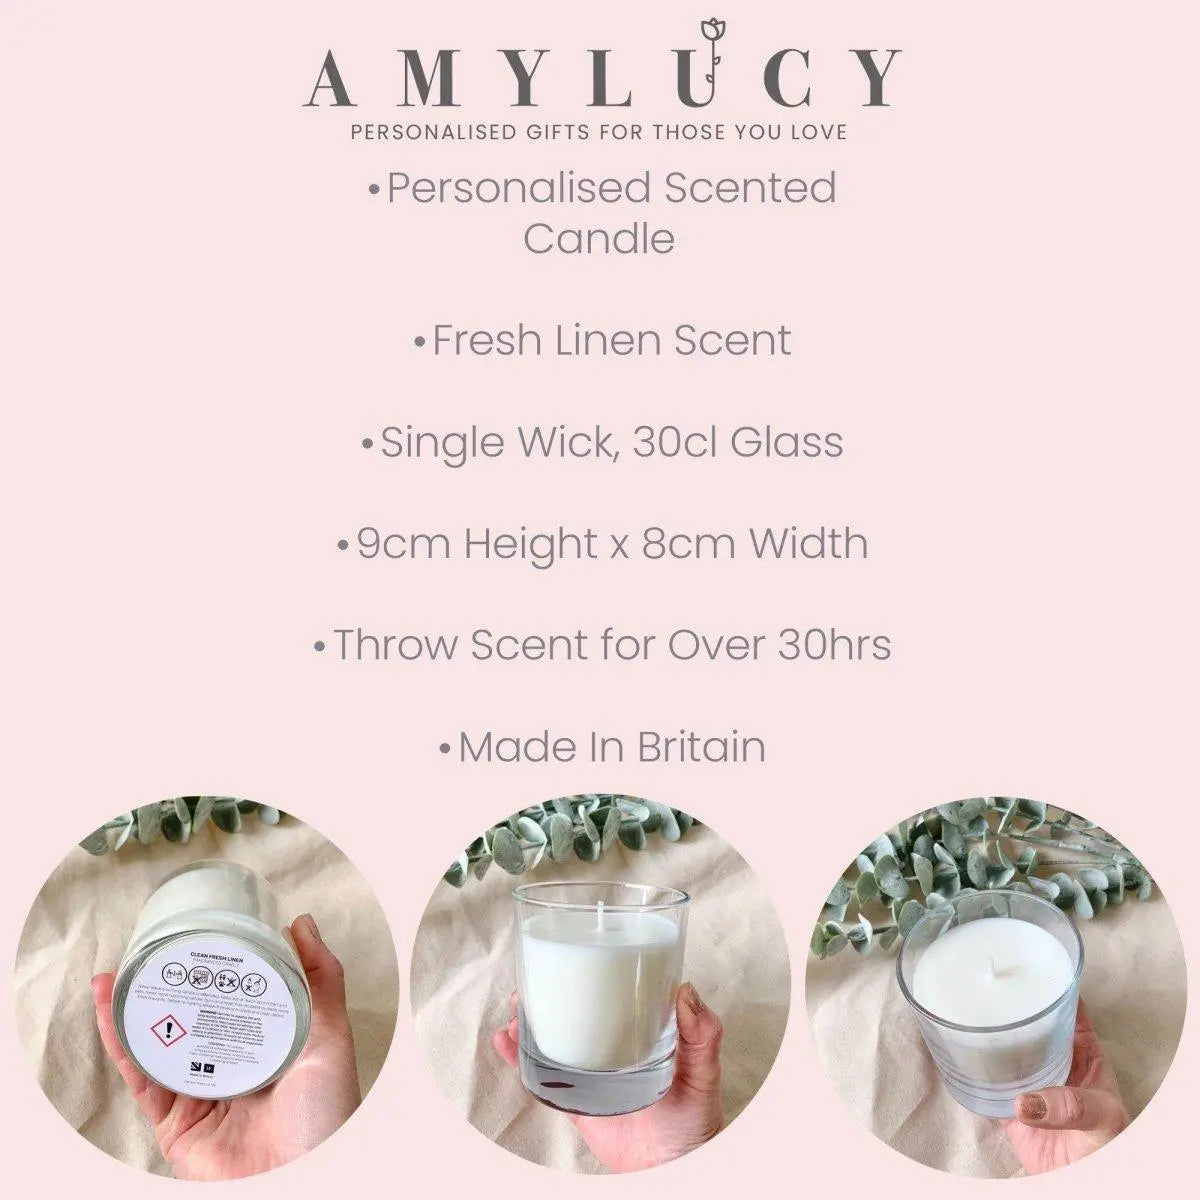 Personalised Miscarriage Gift, Baby Loss Memorial Candle, Angel Candle Gift, Personalised Bereaved Mum Gift, Personalised Sympathy Gift - Amy Lucy